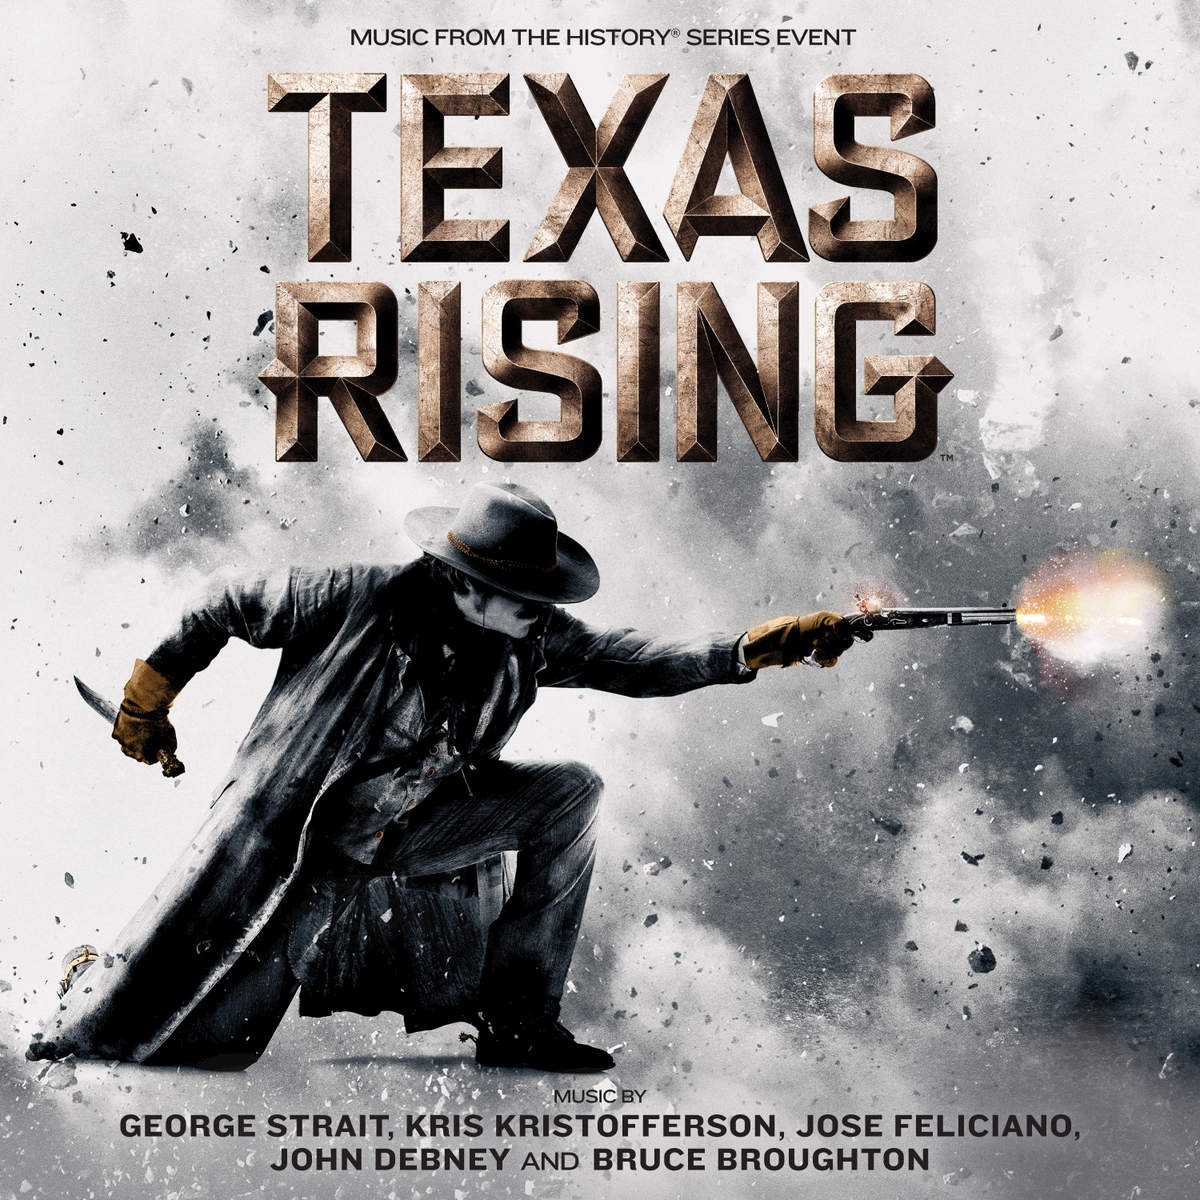 Gettin' A Whippin'  From " Texas Rising" Mini Series Soundtrack